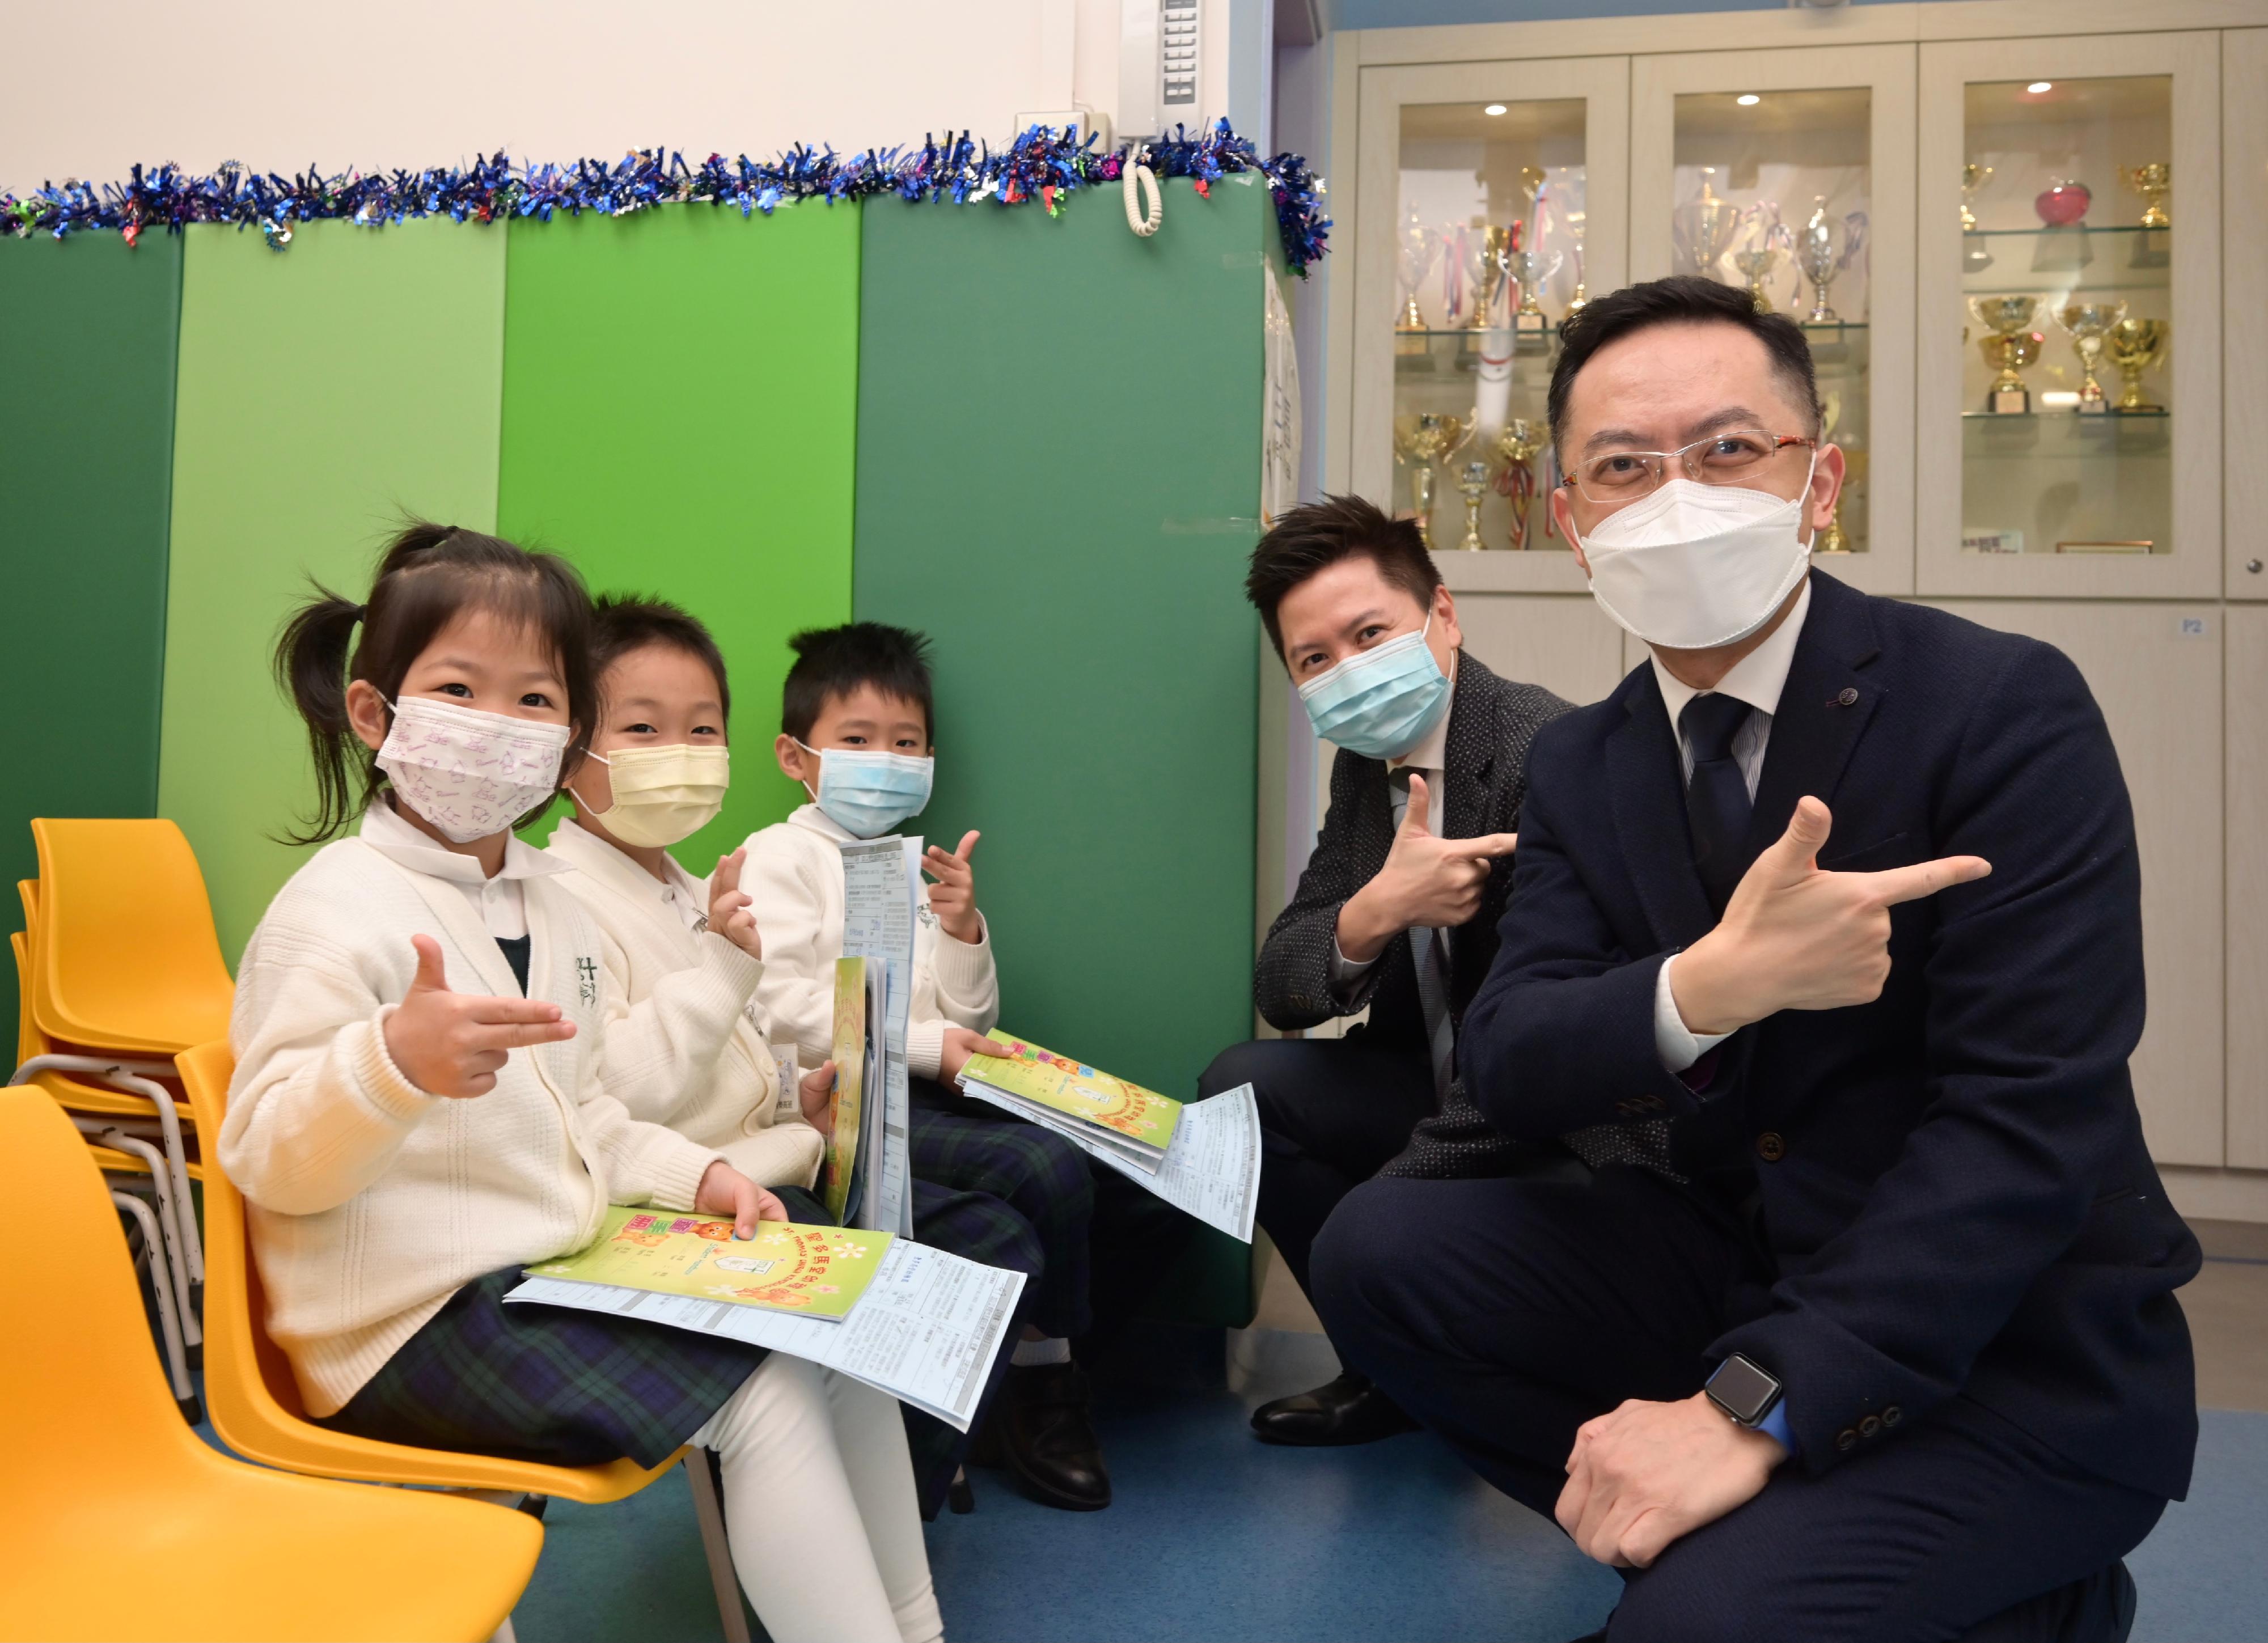 The Director of Health, Dr Ronald Lam, and the Controller of the Centre for Health Protection of the Department of Health, Dr Edwin Tsui, this morning (December 15) visited St Thomas' Church Kindergarten in Shek Kip Mei to view the implementation of the school outreach seasonal influenza vaccination service. Photo shows Dr Lam (first right) and Dr Tsui (second right) with pupils ready to receive vaccination.